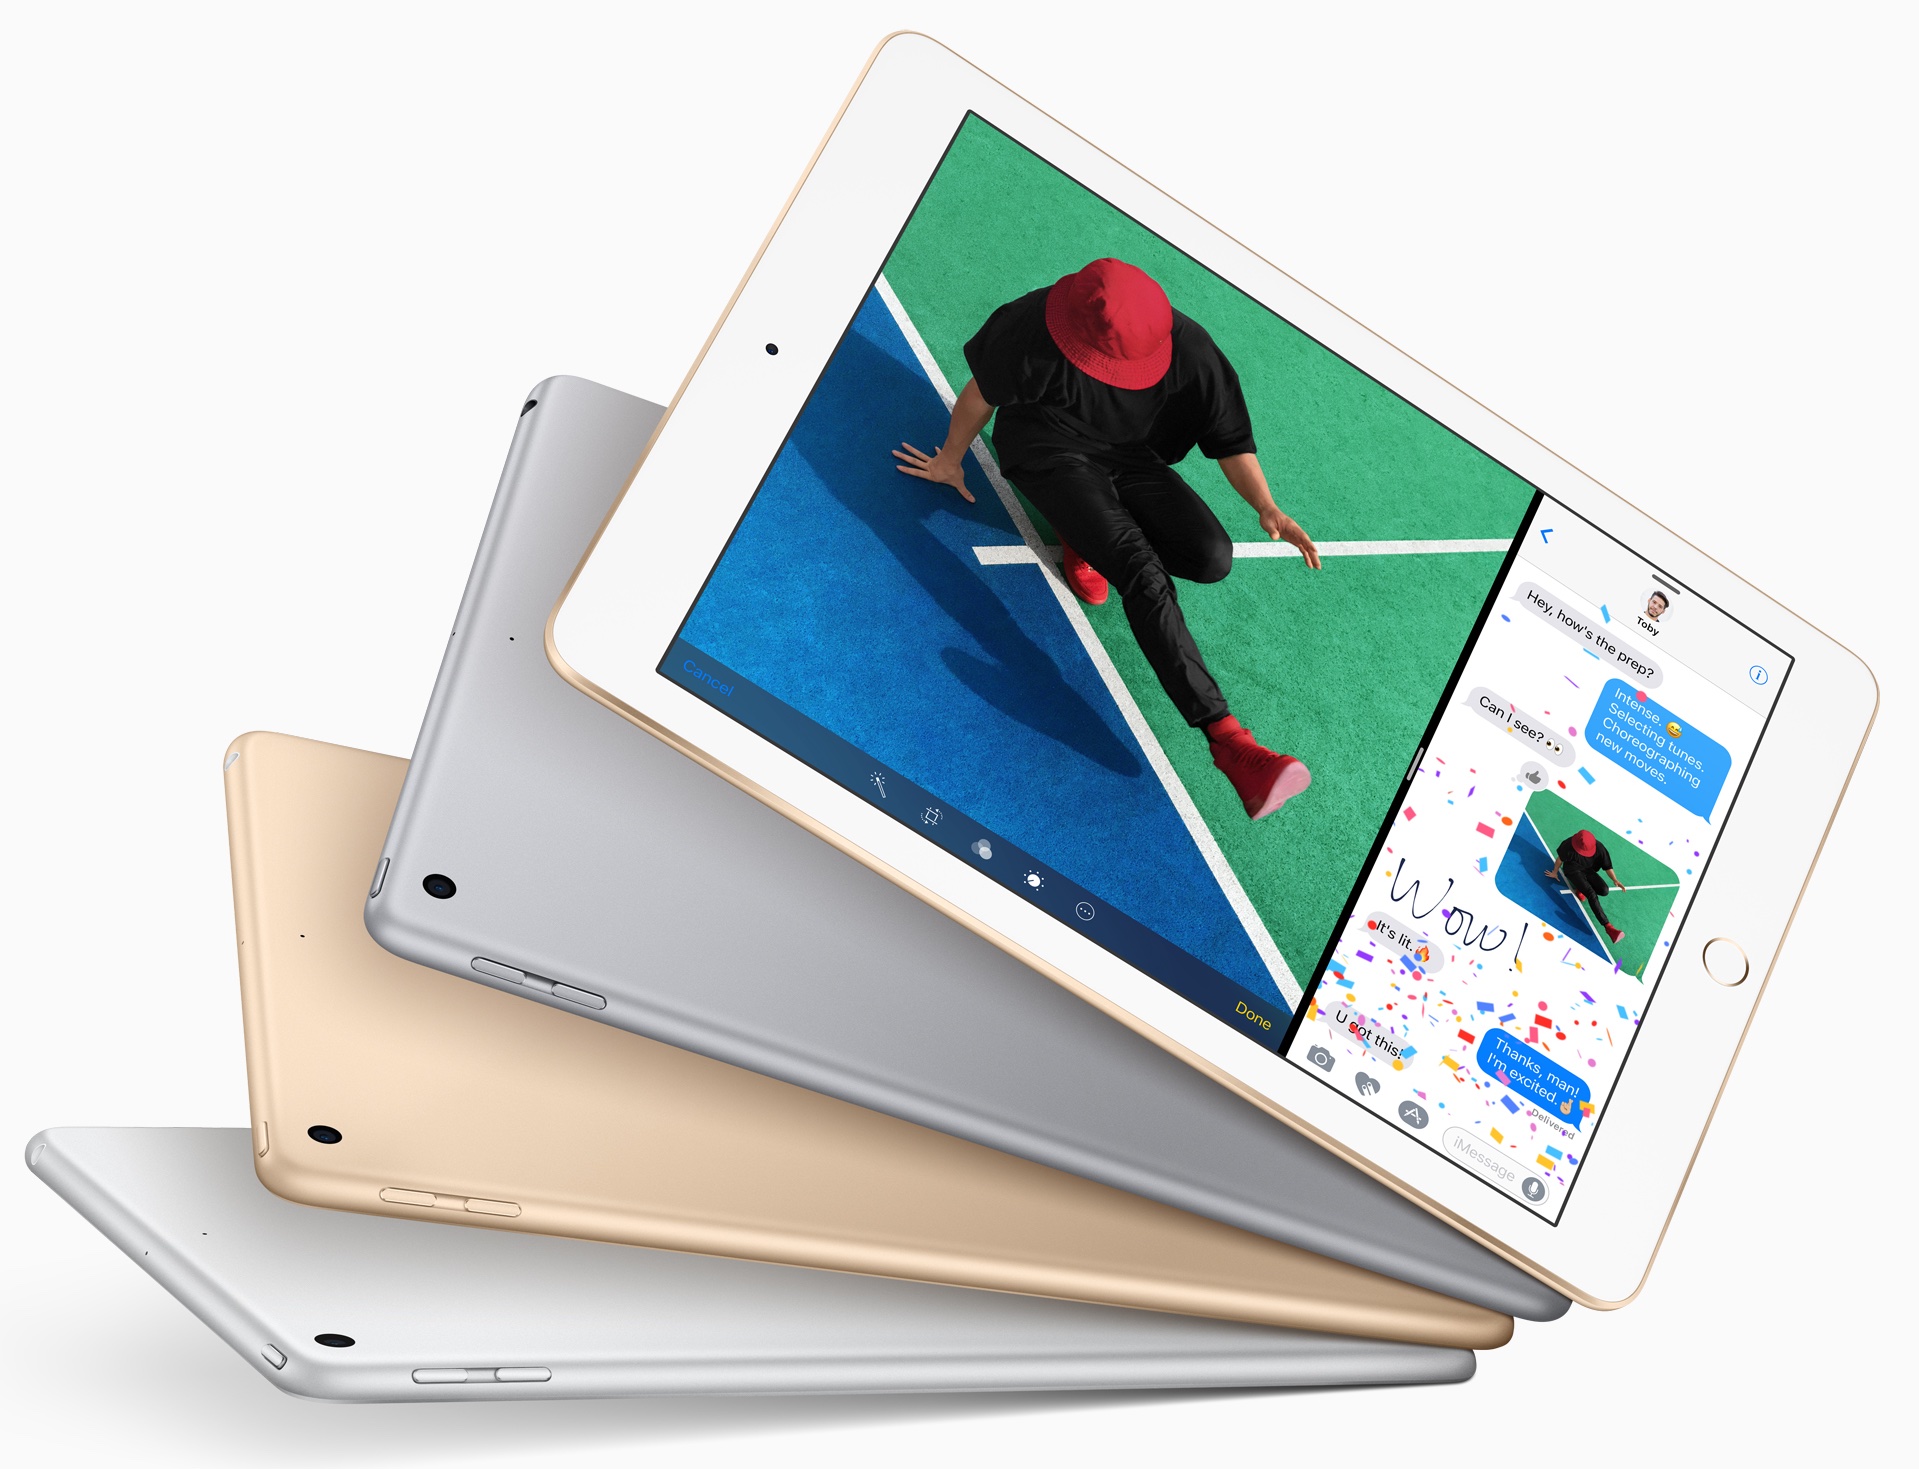 10.2-inch iPad Could Launch Alongside iPhone 11 in Q3 2019